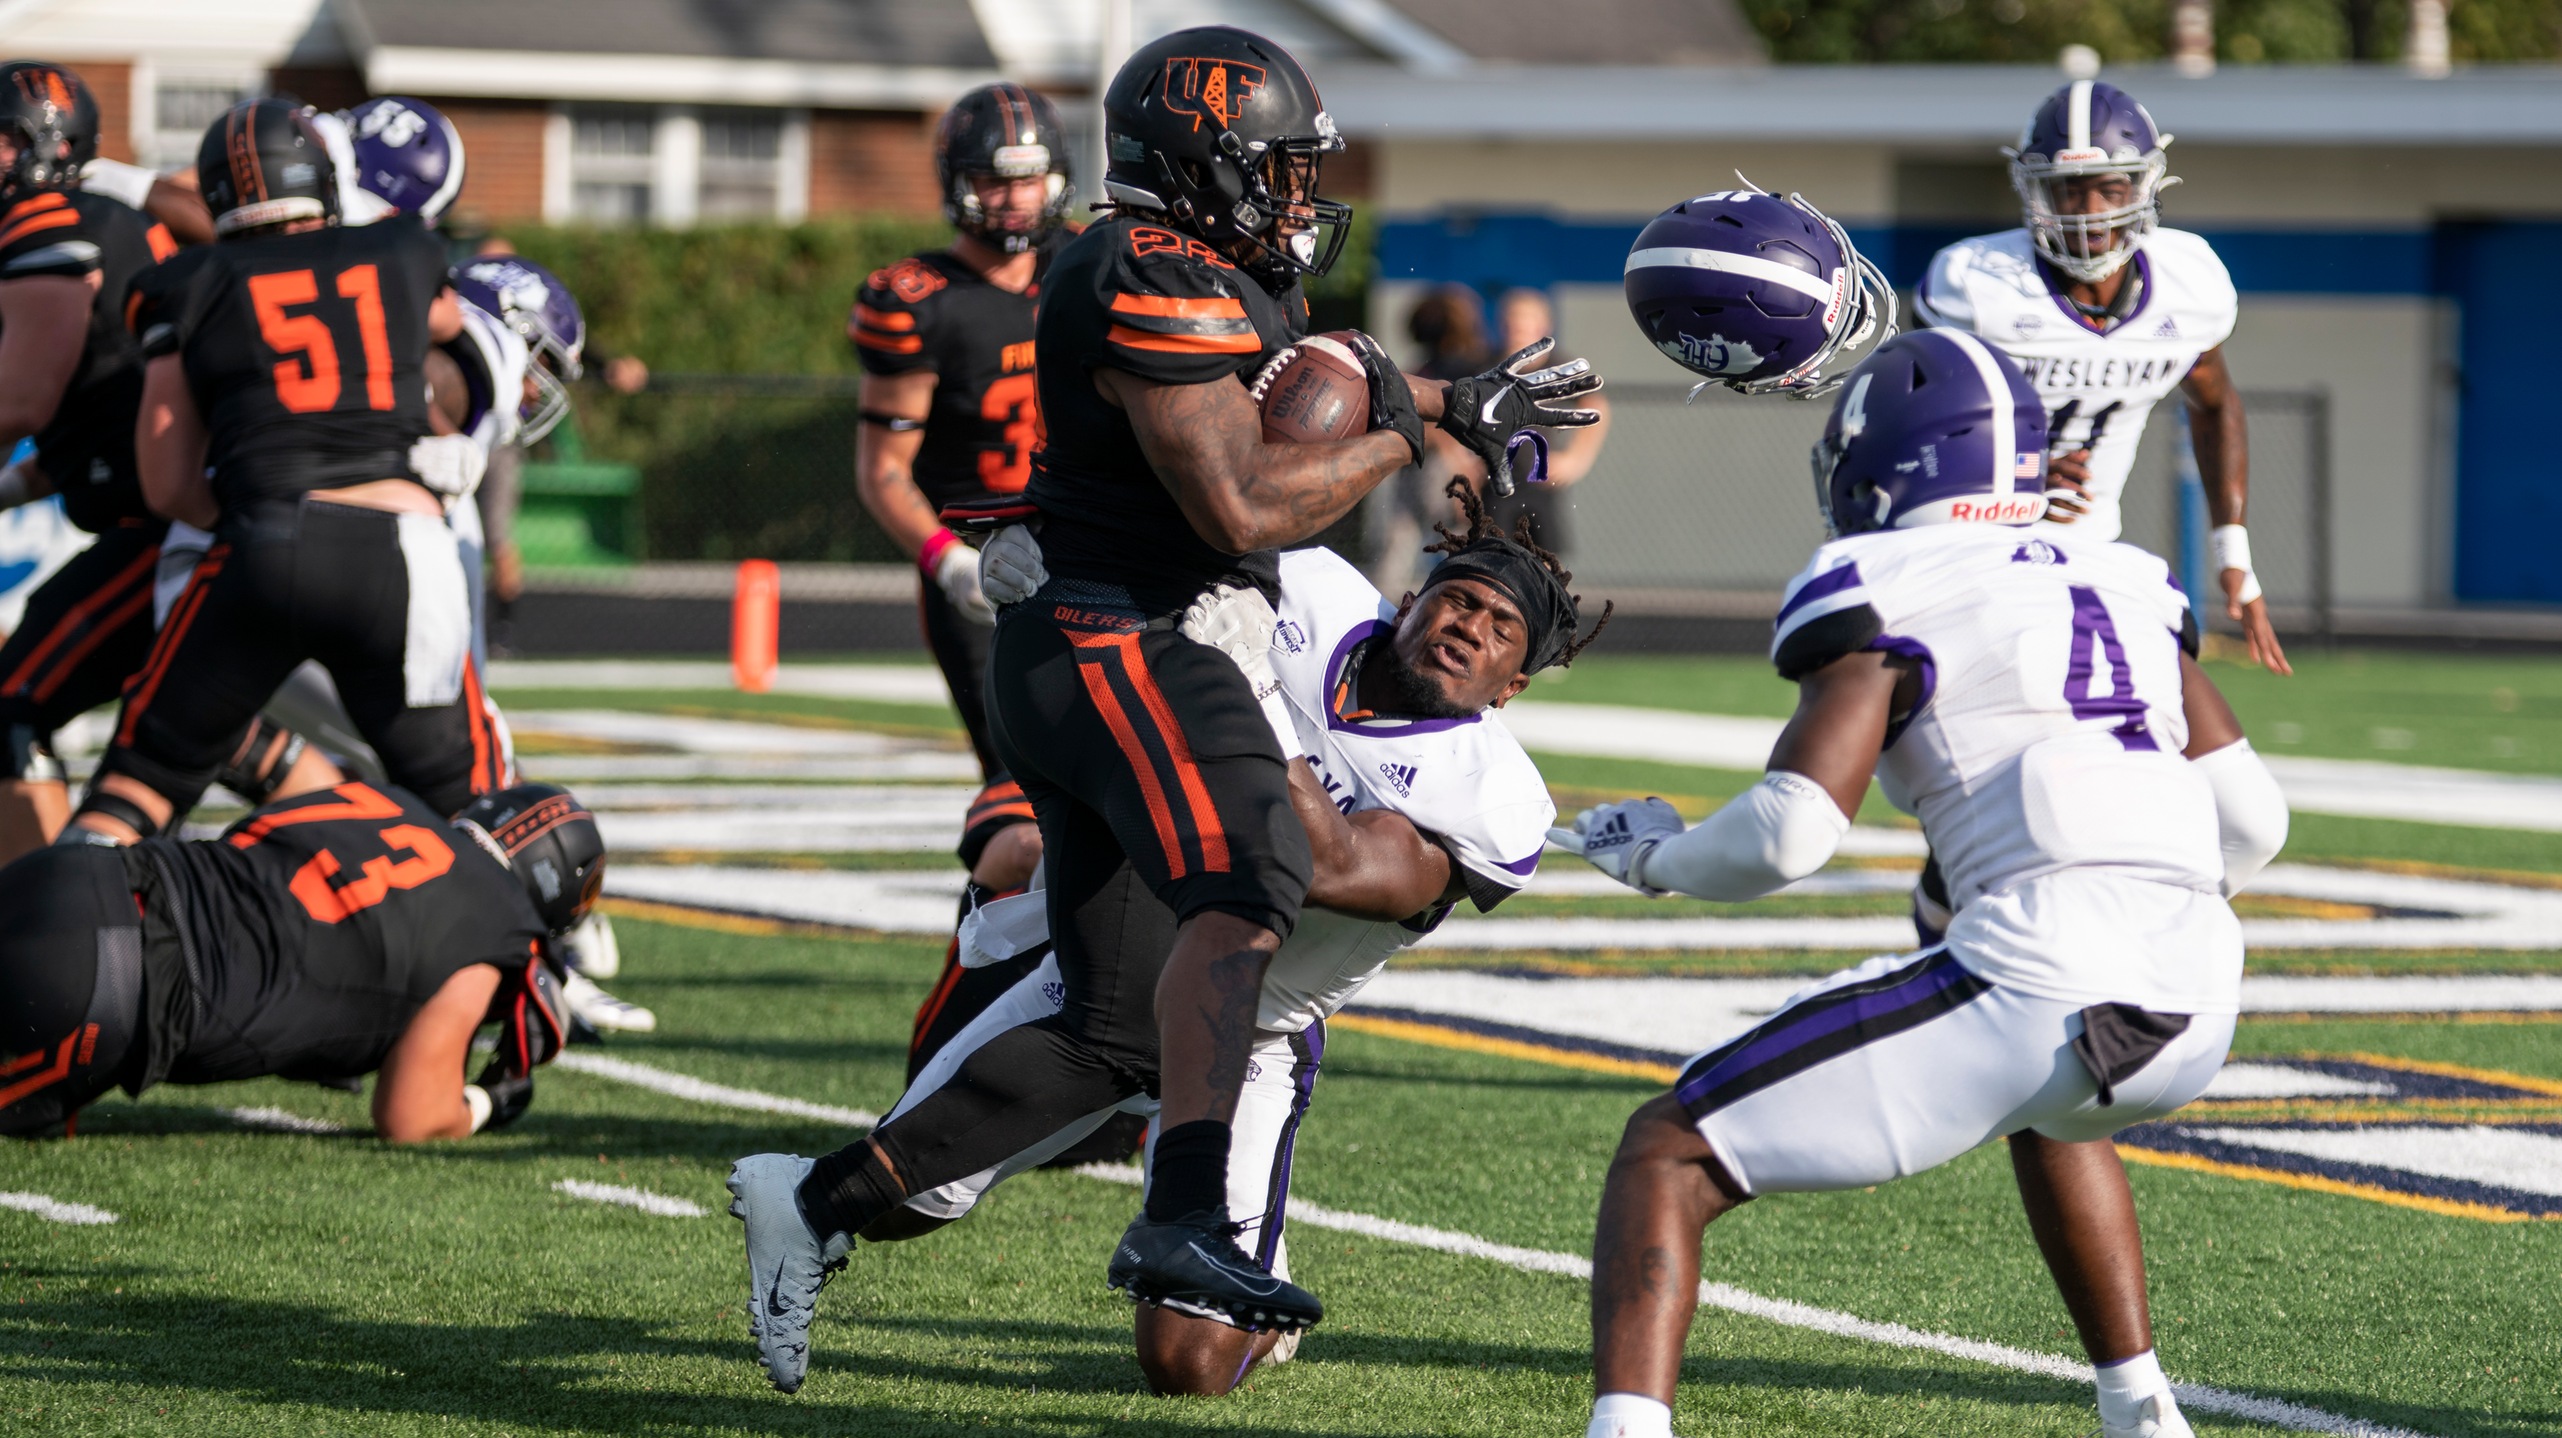 Runner in black jersey running over defender in white with his purple helmet flying off due to forceable contact